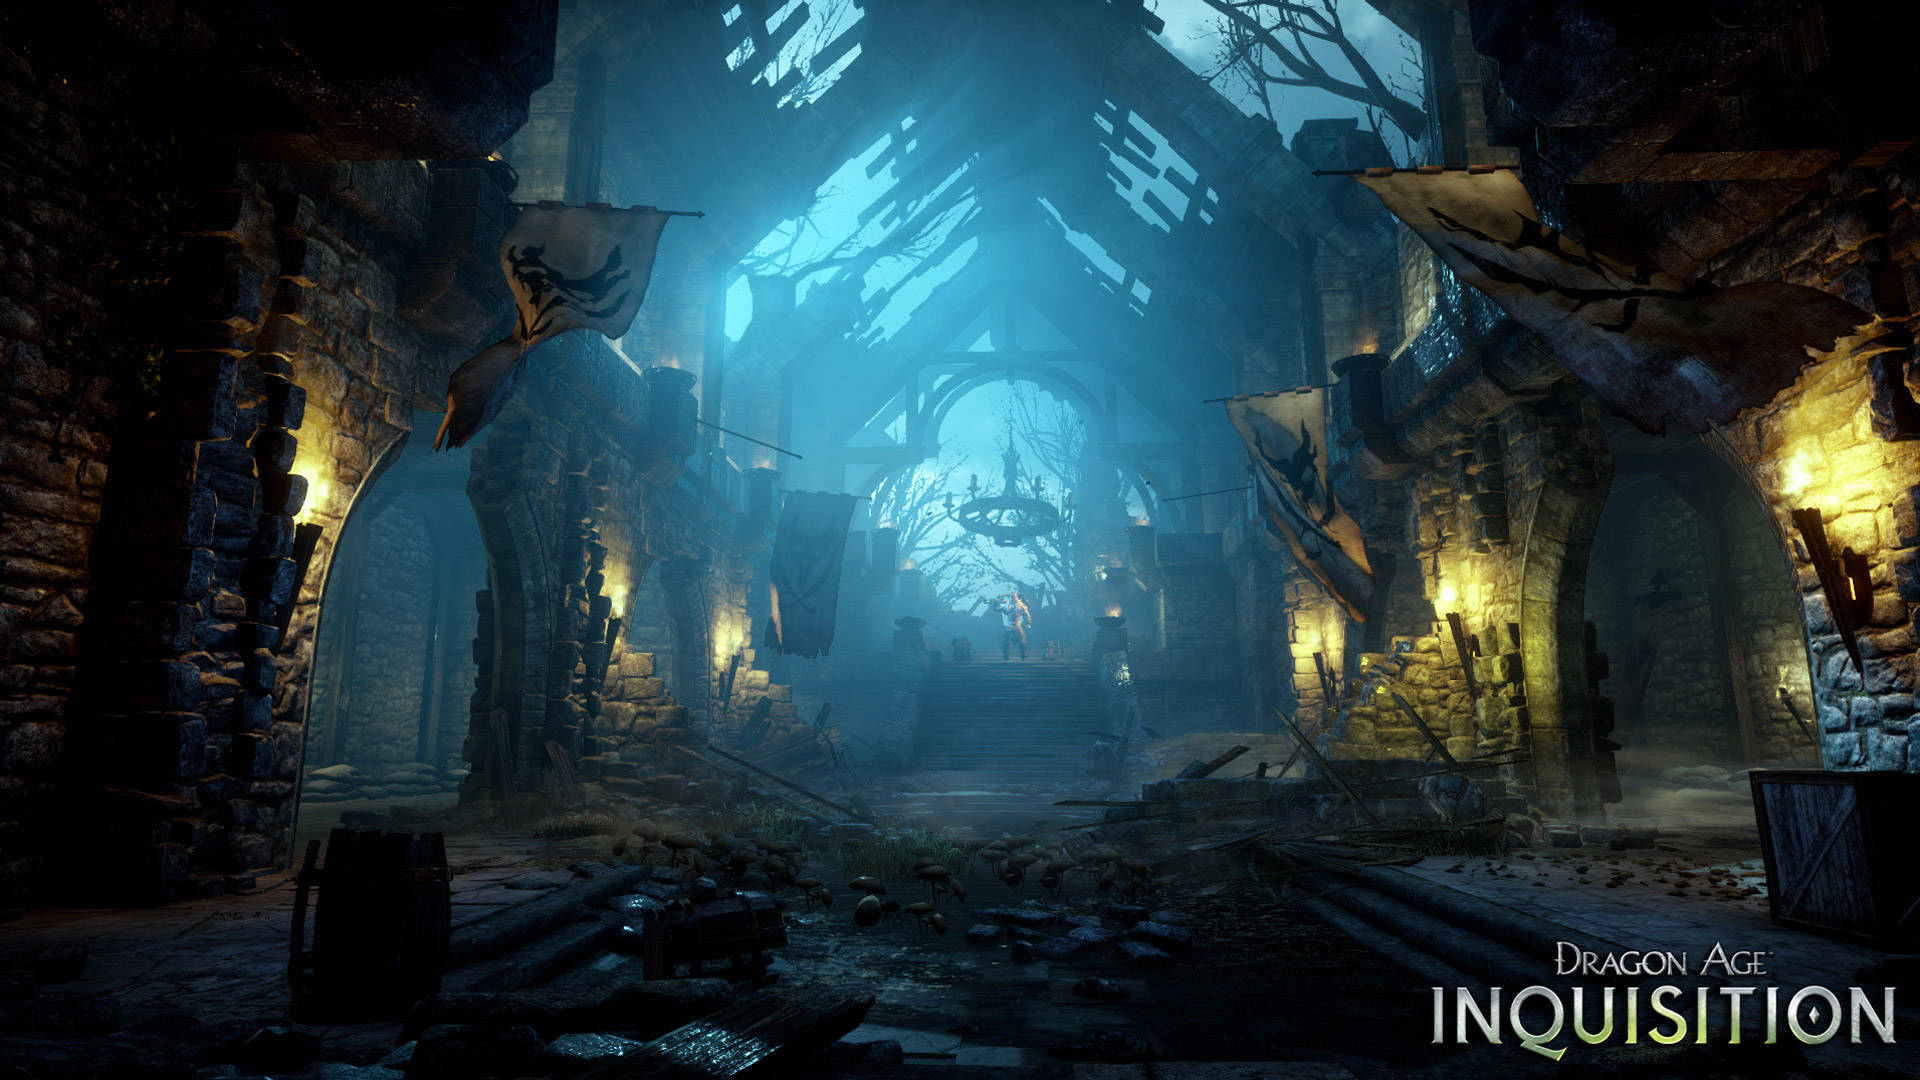 Dragon Age Inquisition Video Game Series Therinfal Redoubt Fortress Wallpaper